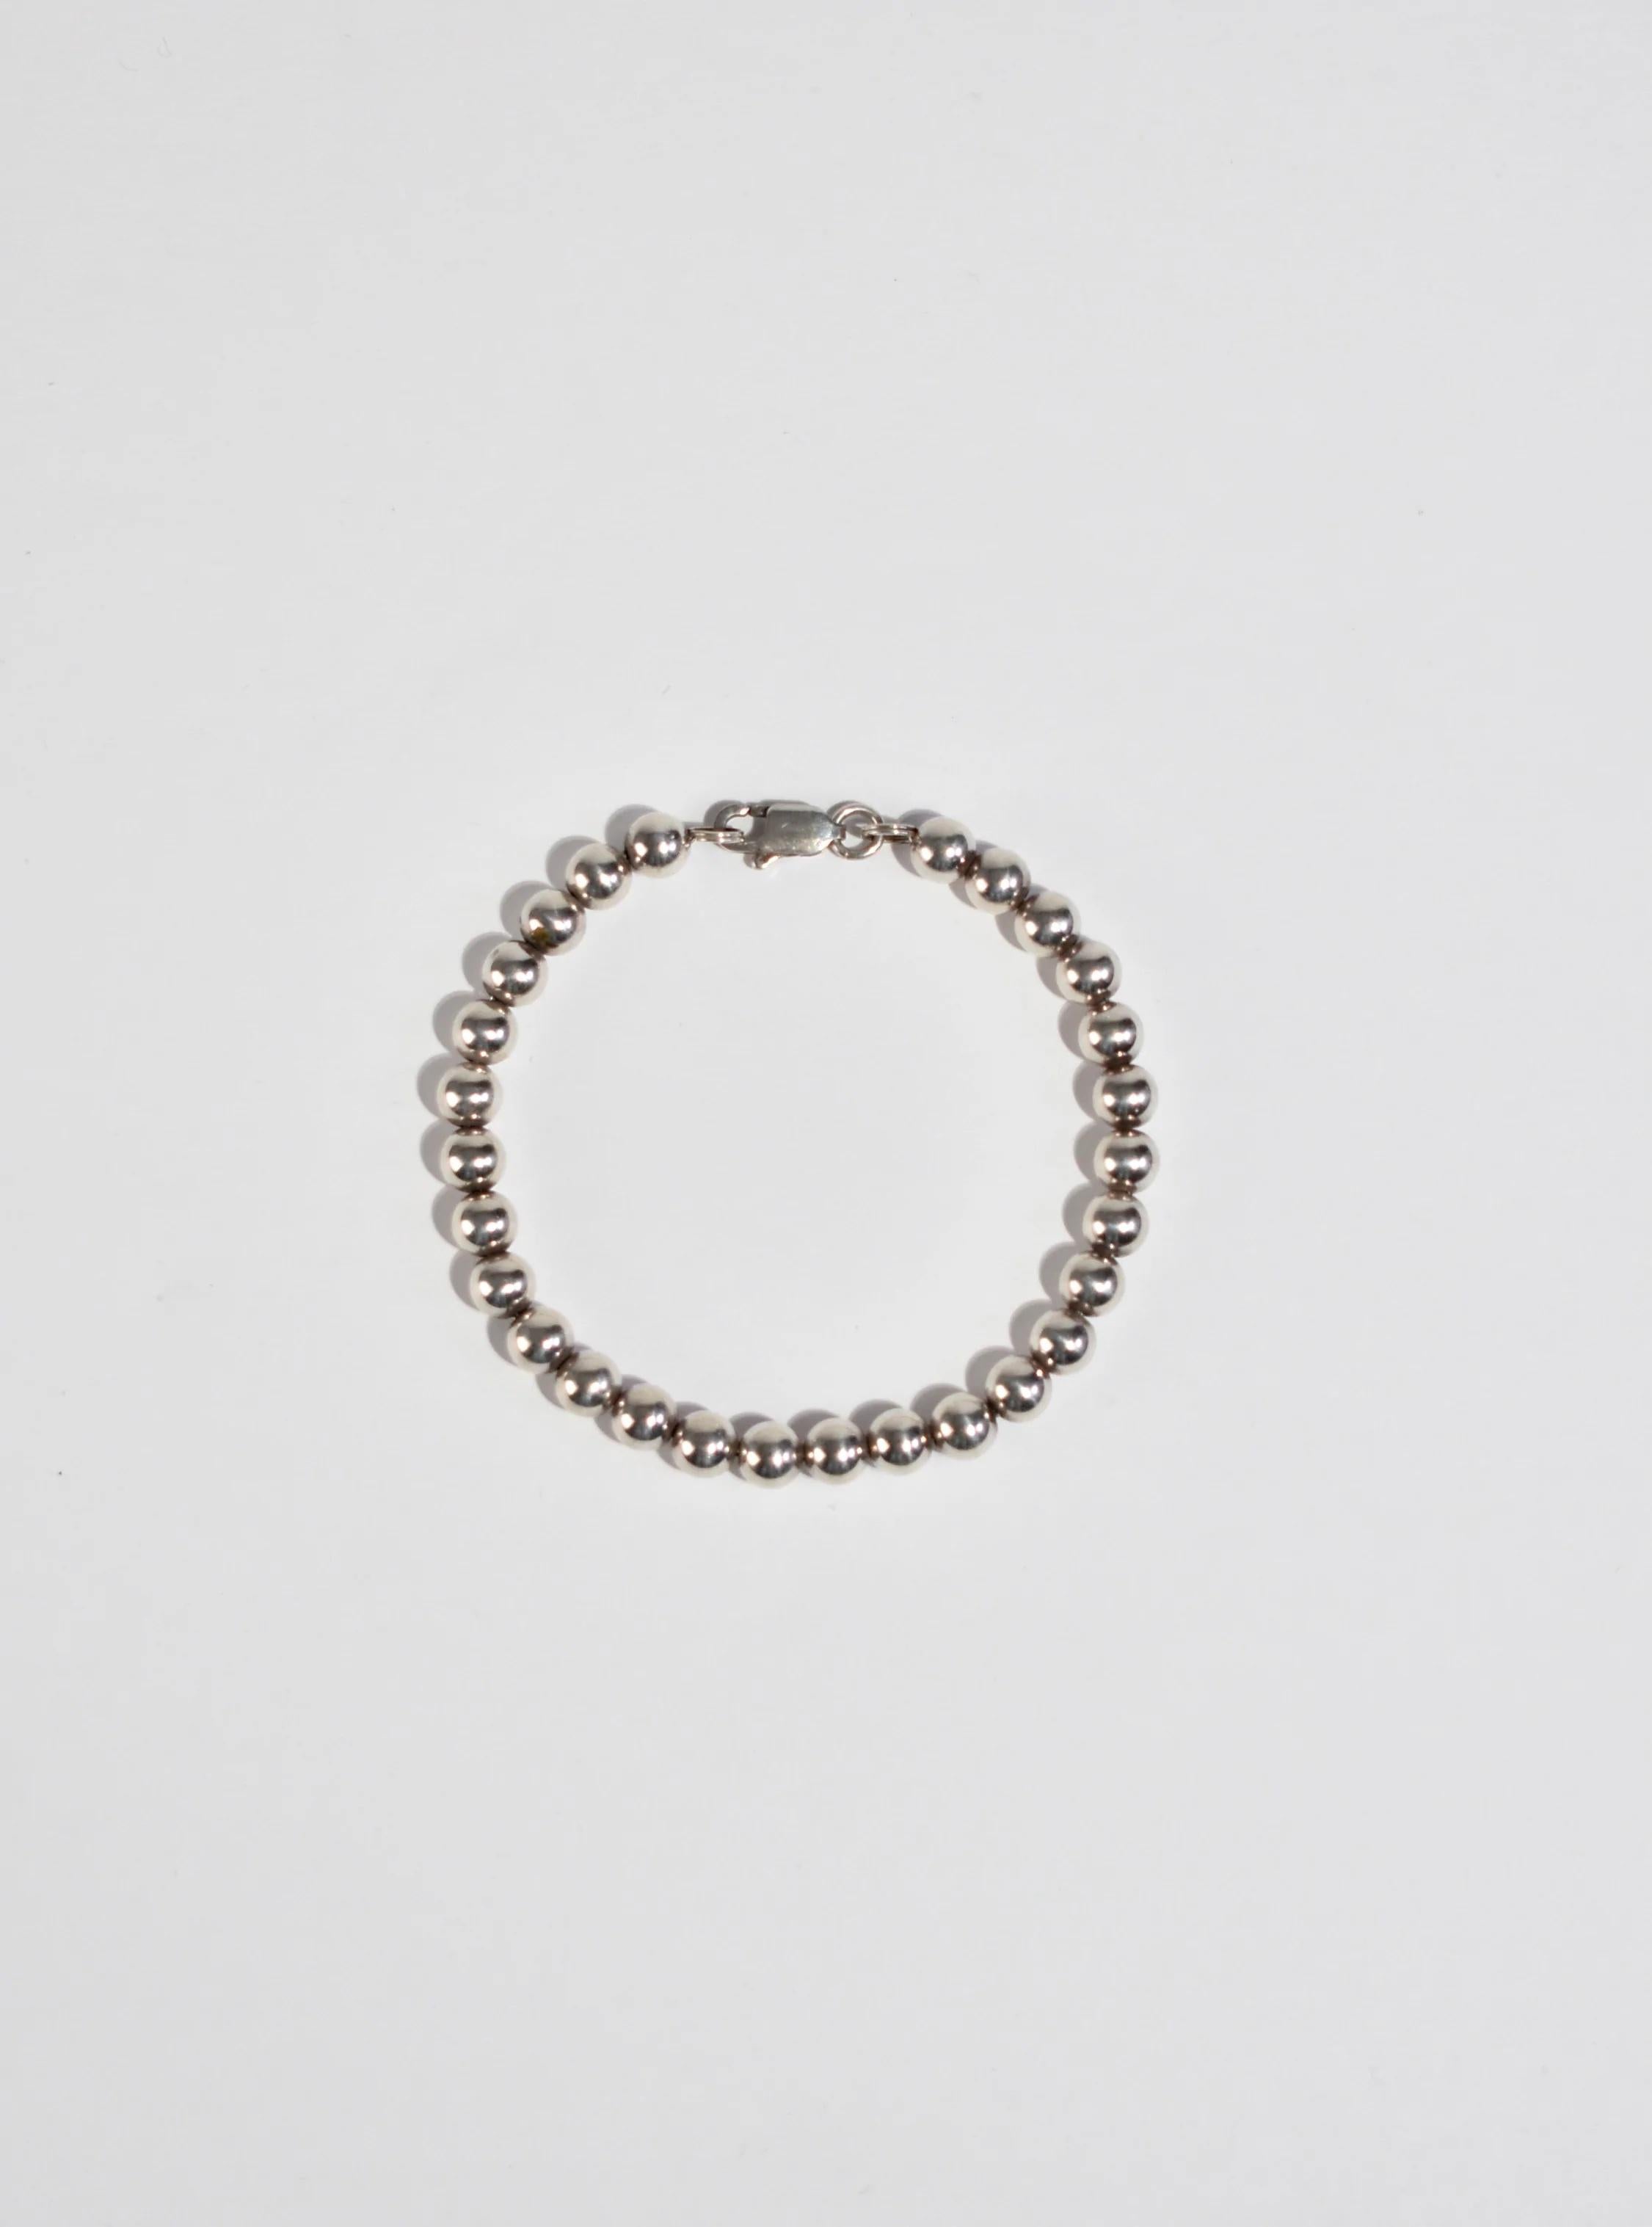 Vintage bracelet with round sterling beads and clasp closure, made in ﻿Italy.

Material: Sterling silver.